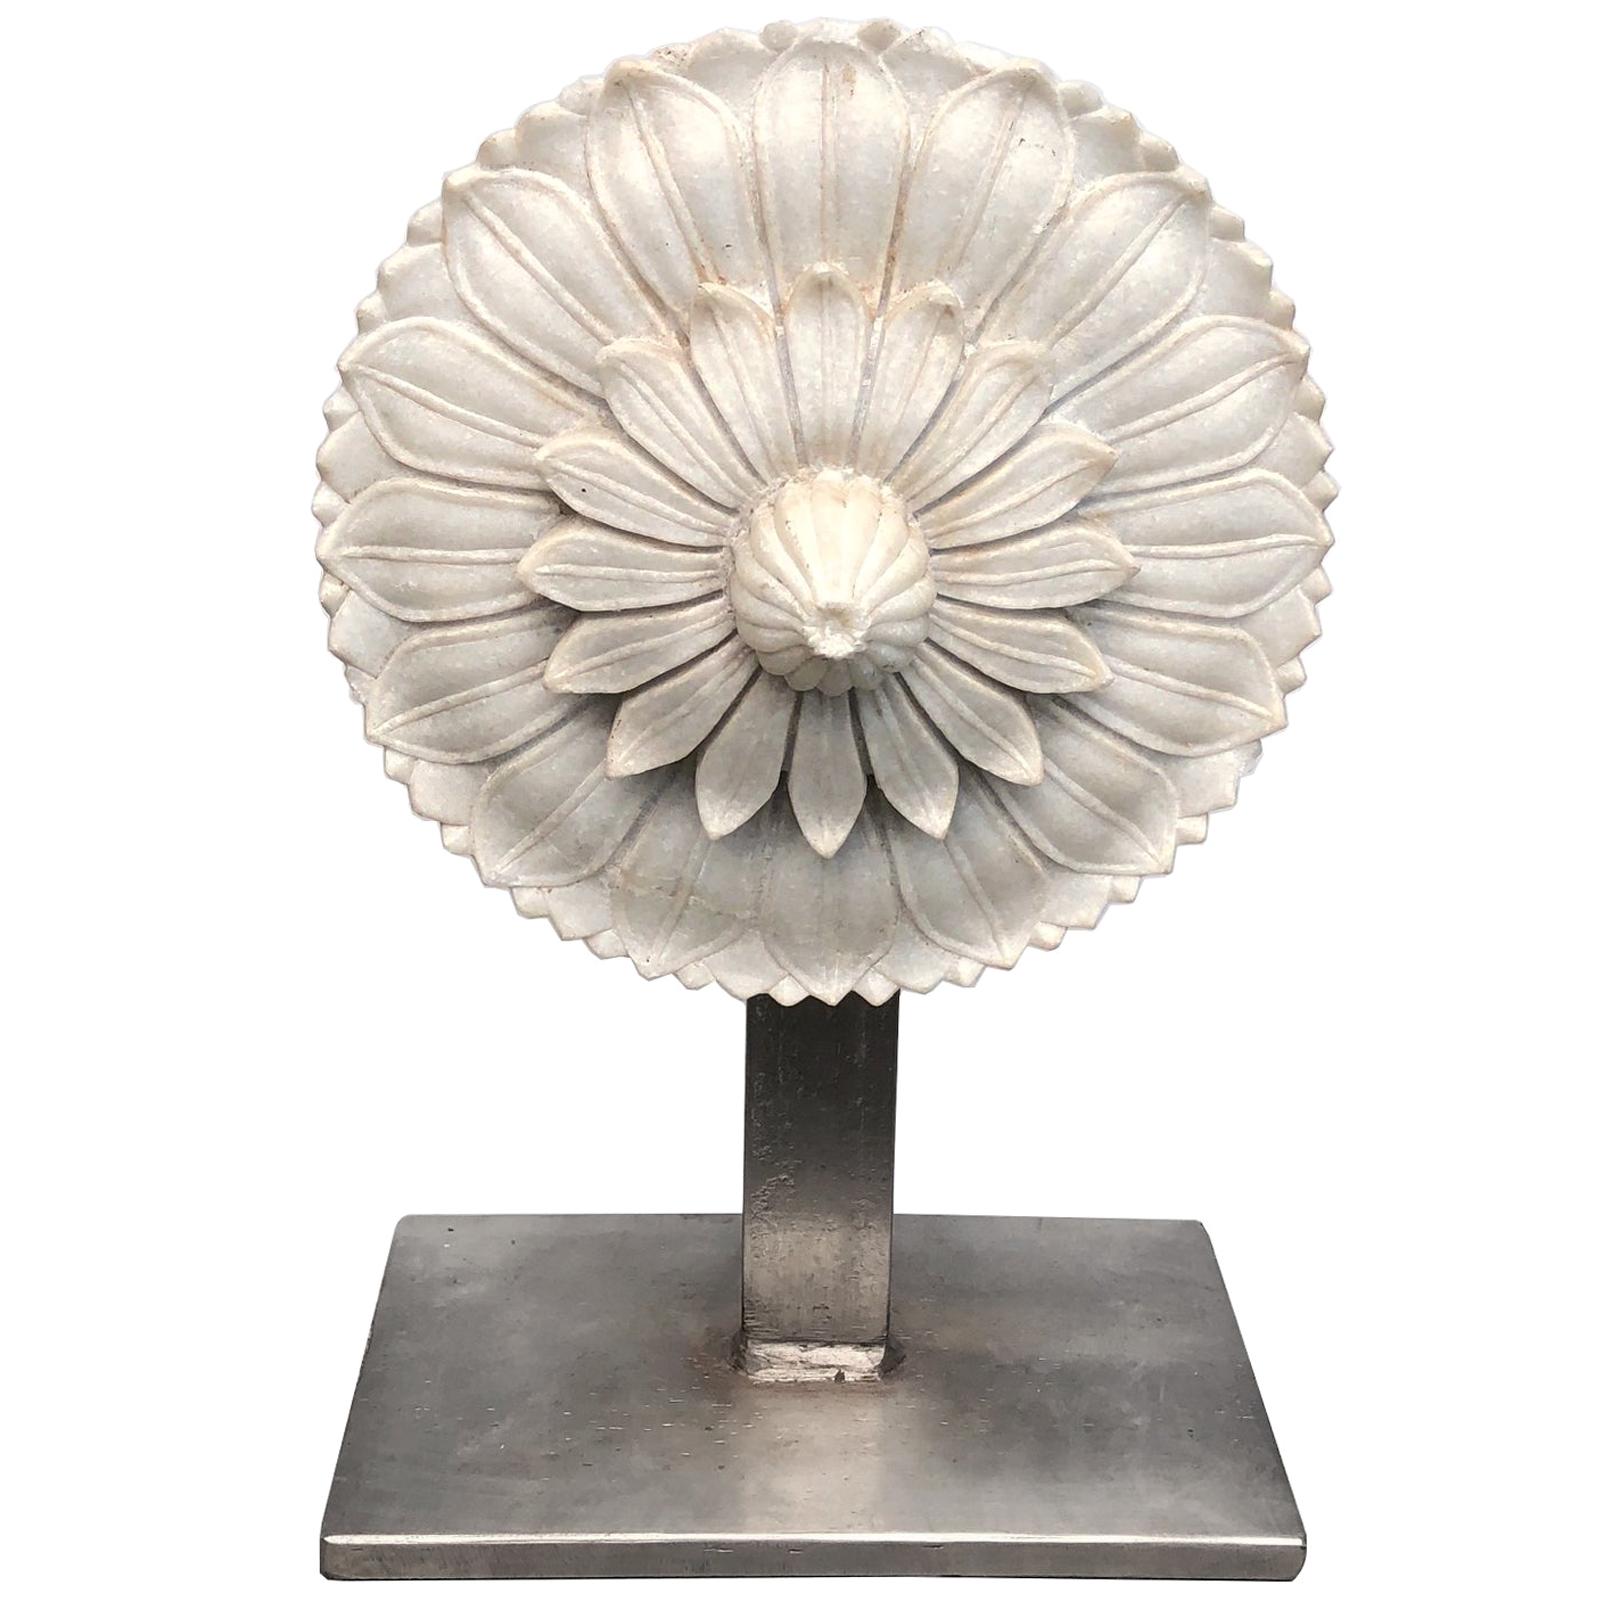 Well-Carved Italian Marble Architectural Element of a Flower on a Steel Stand